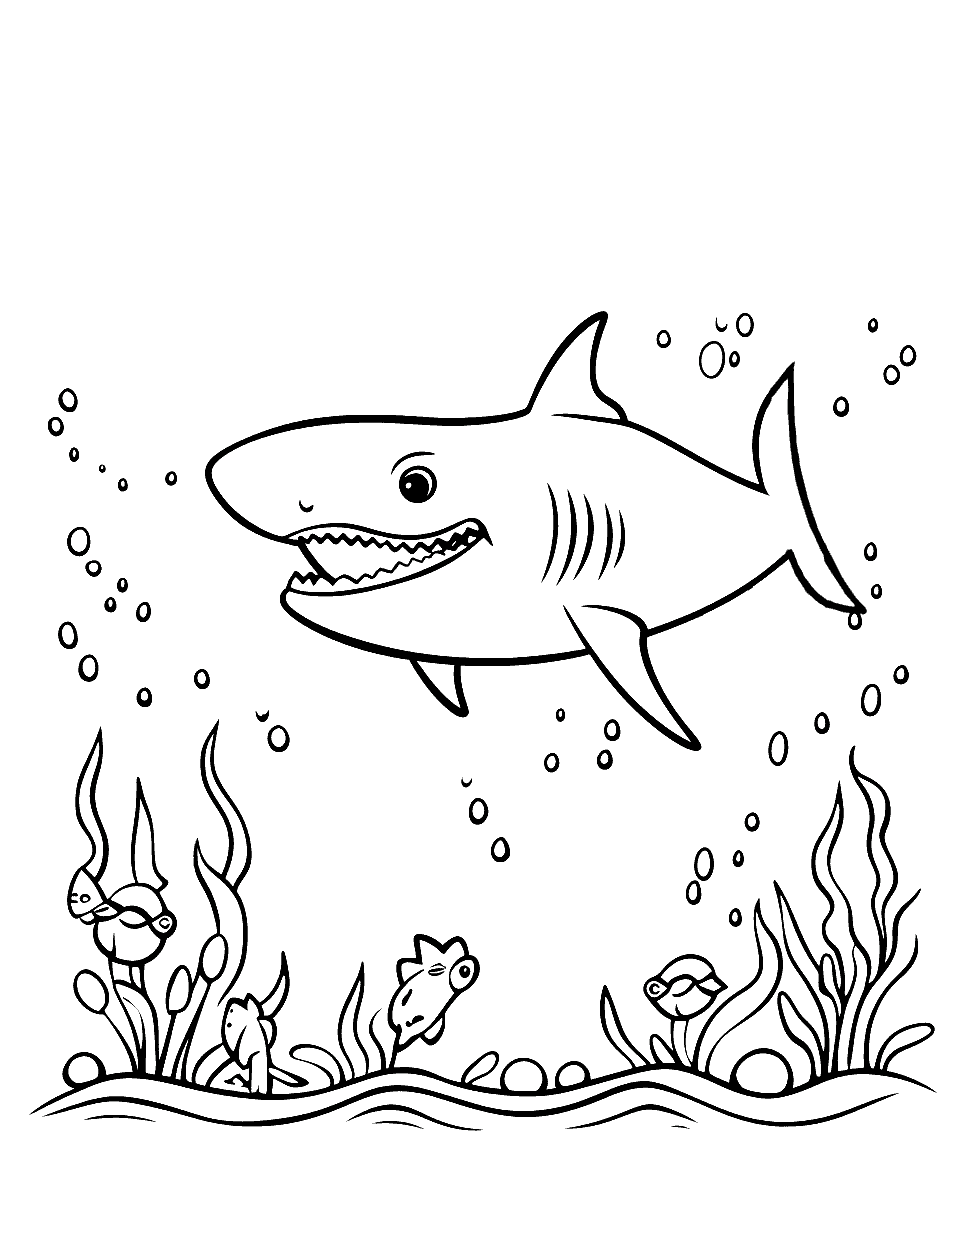 Shark's Day Off Shark Coloring Page - A day in the life of a shark when it’s not hunting.